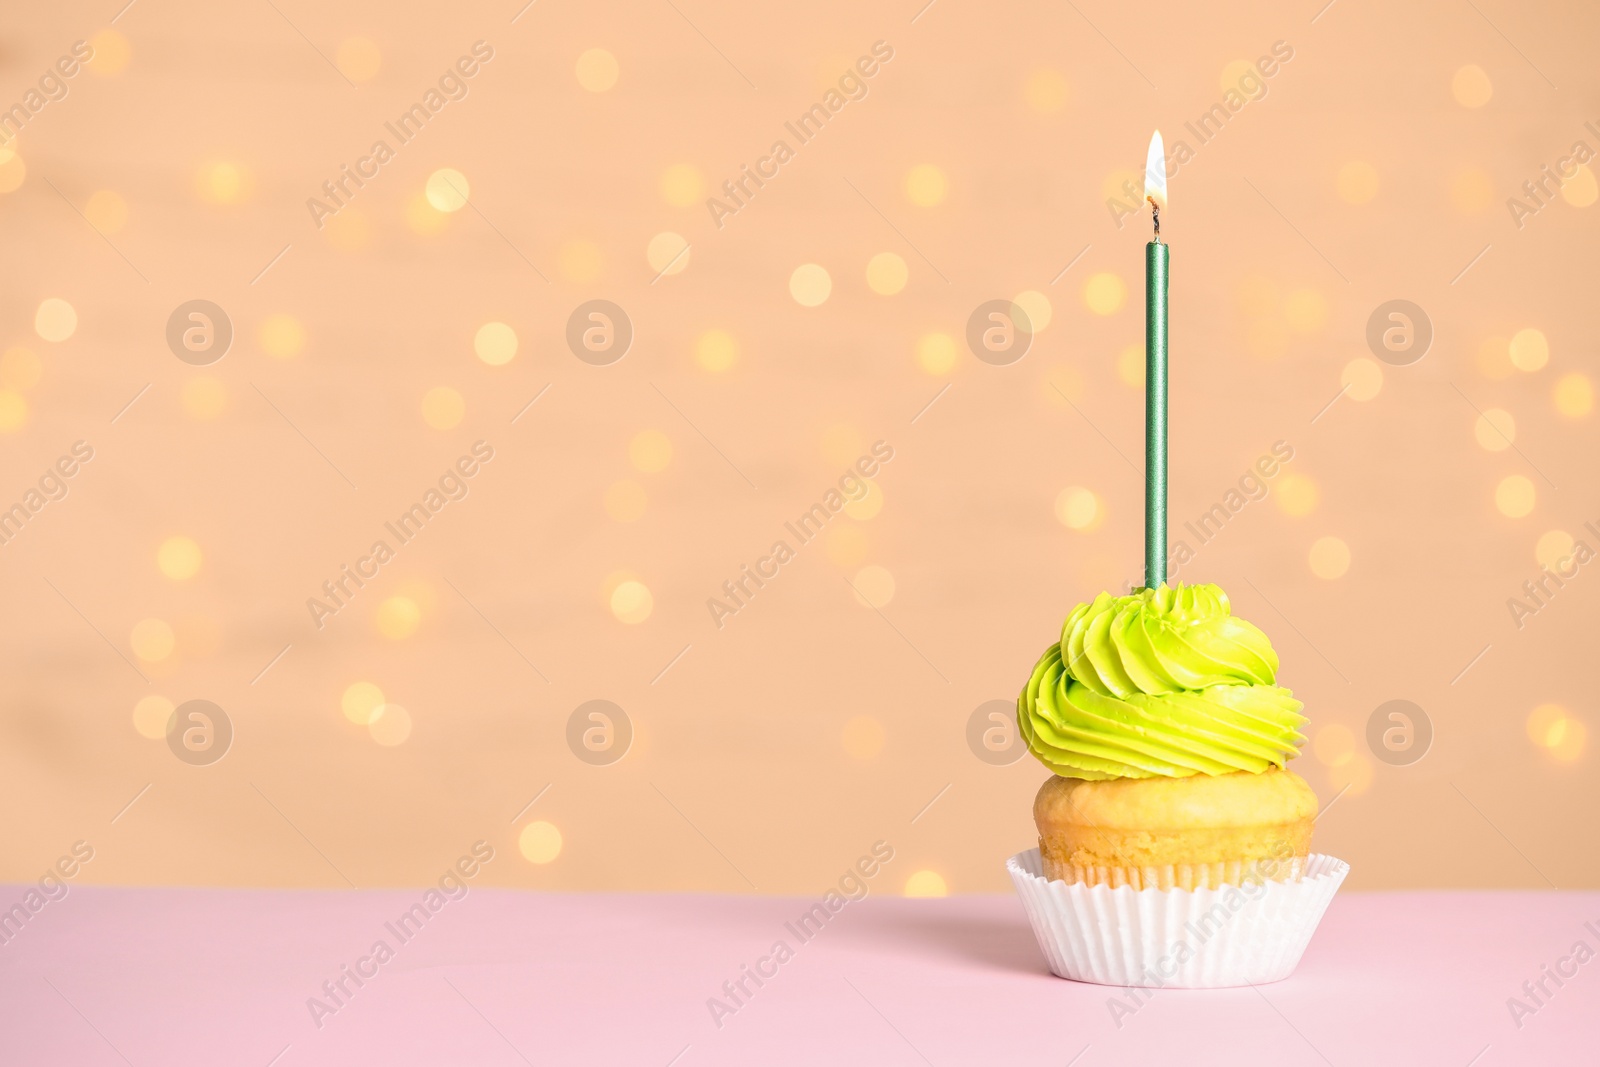 Photo of Birthday cupcake with candle on table against festive lights